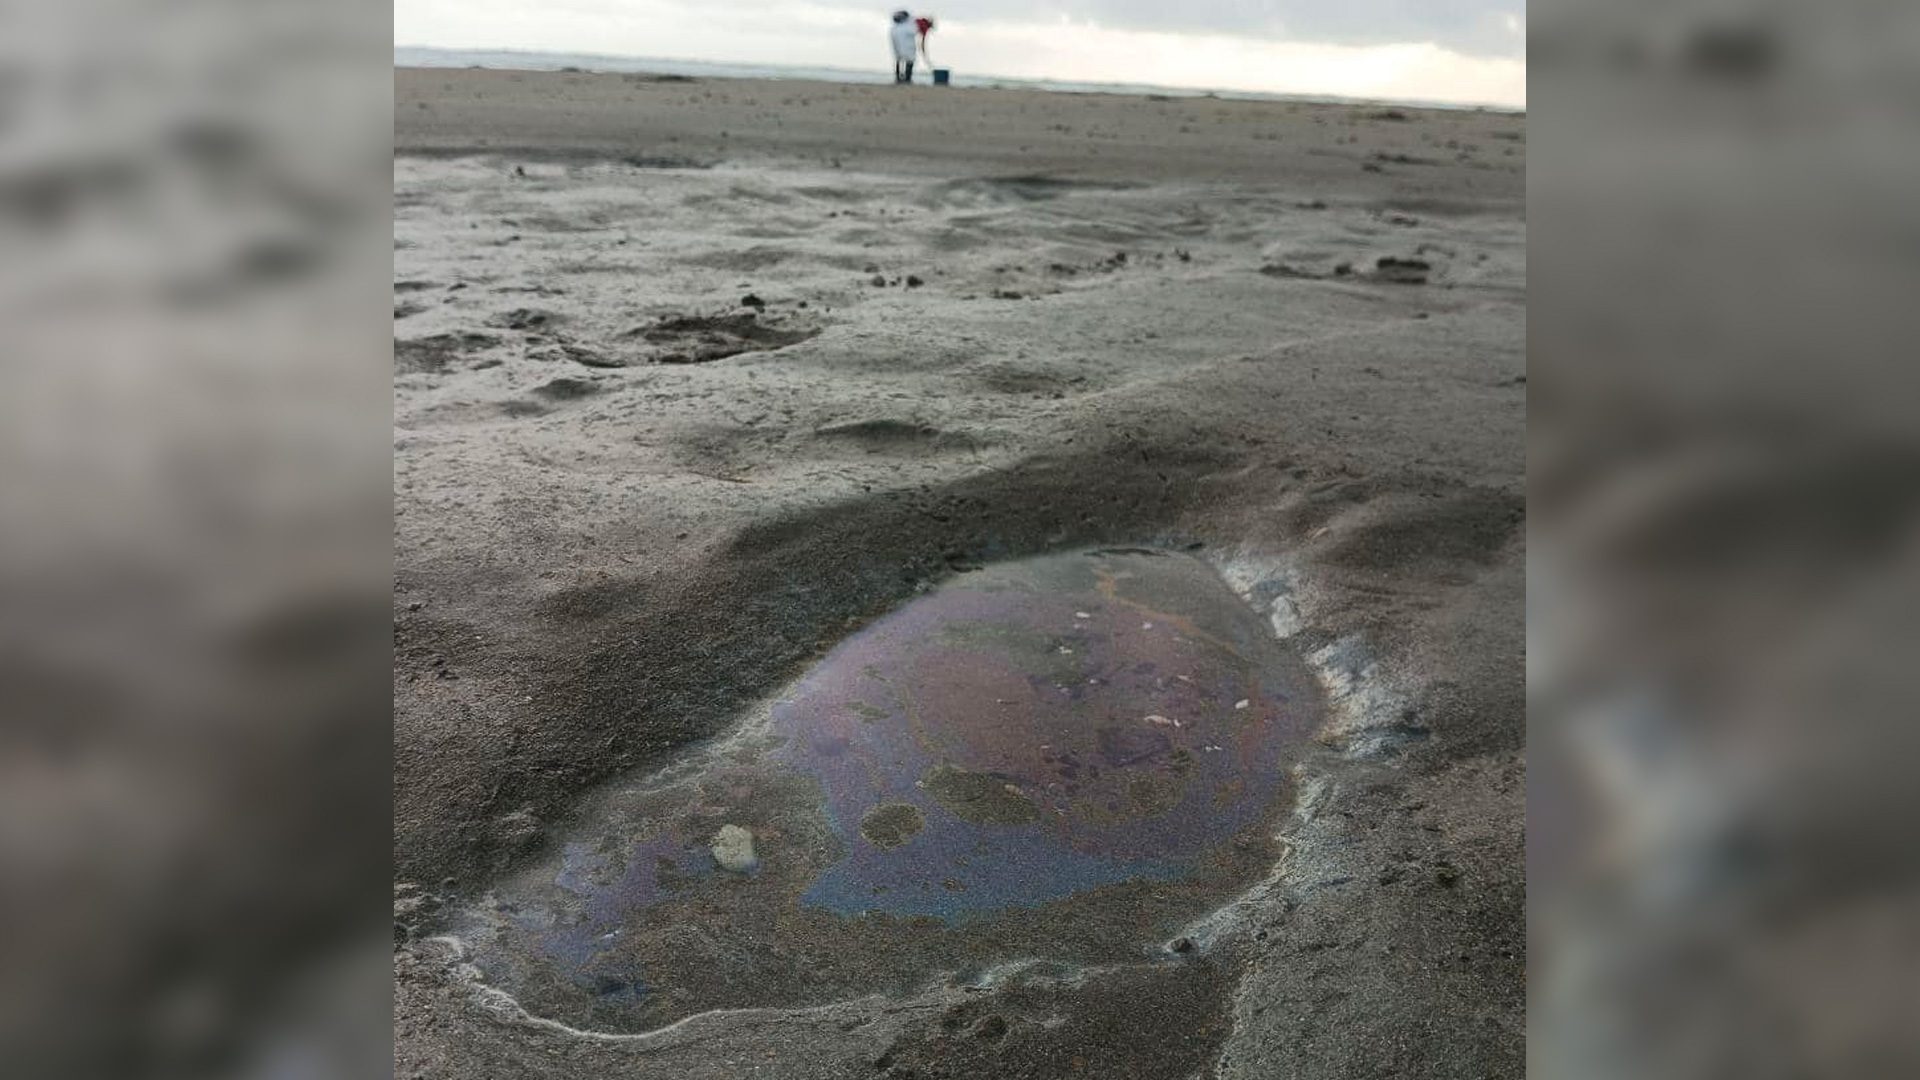 Oil spill exposes a Coast Guard in dire need of modernization